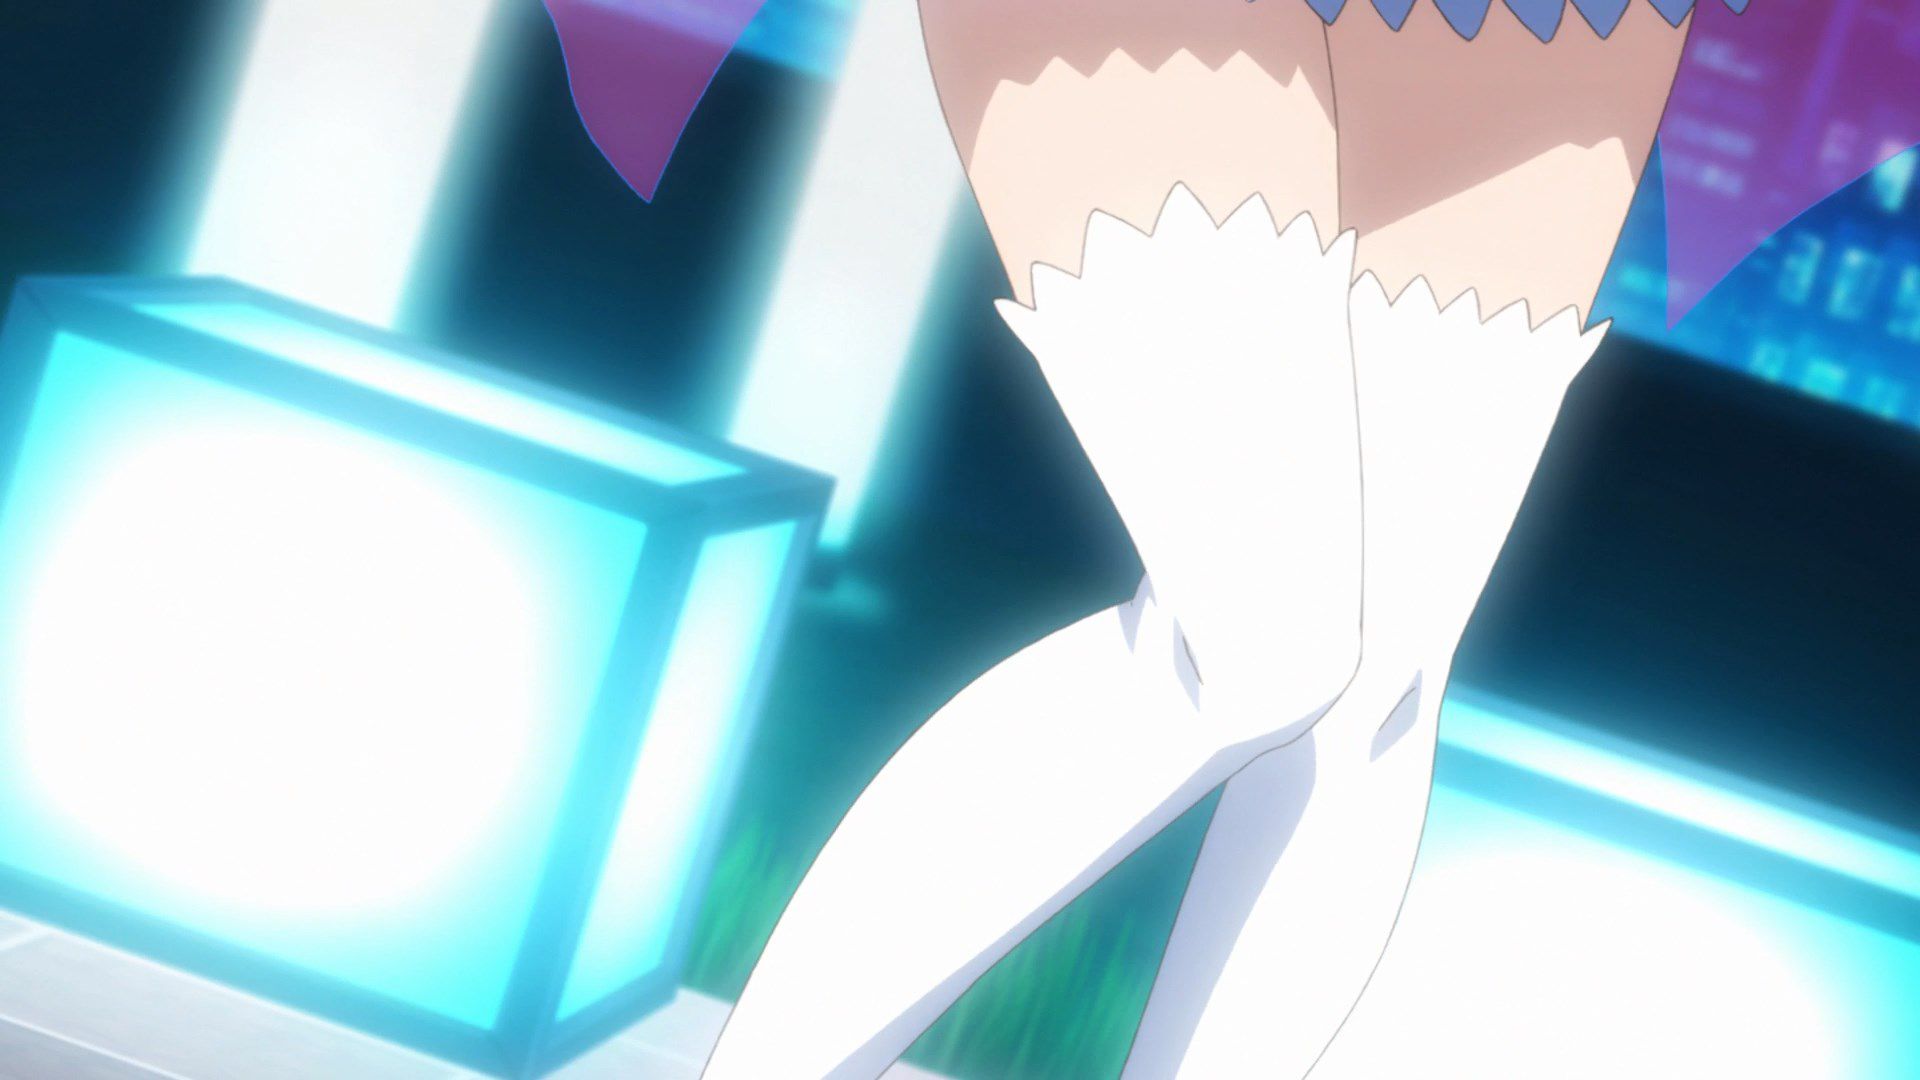 [God images] "love live! ' Μm ' PV's leg is too erotic everyone wakes up to a leg fetish of wwwww 60